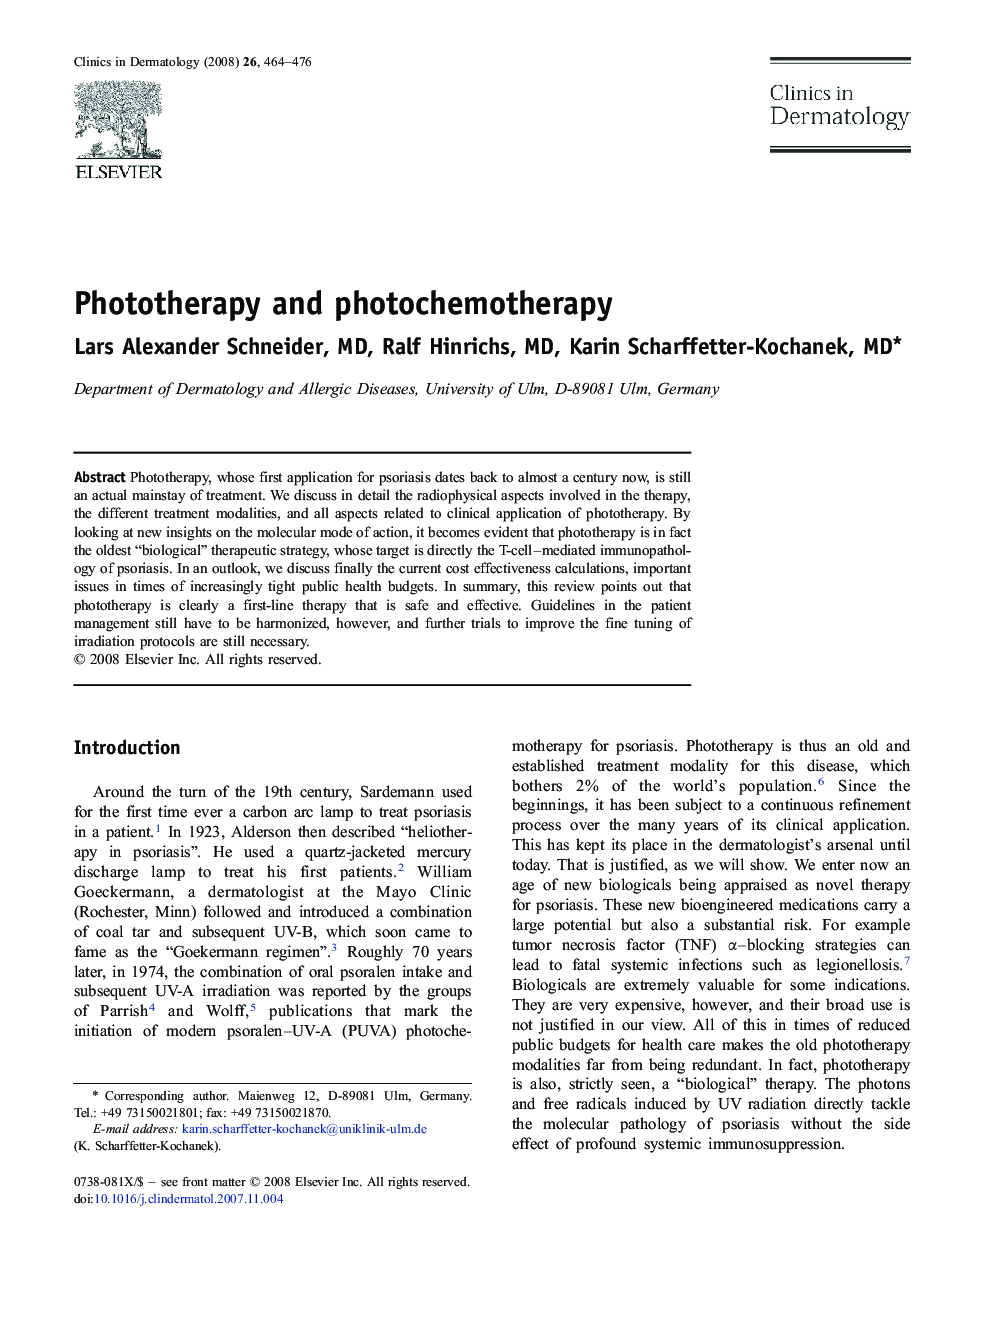 Phototherapy and photochemotherapy